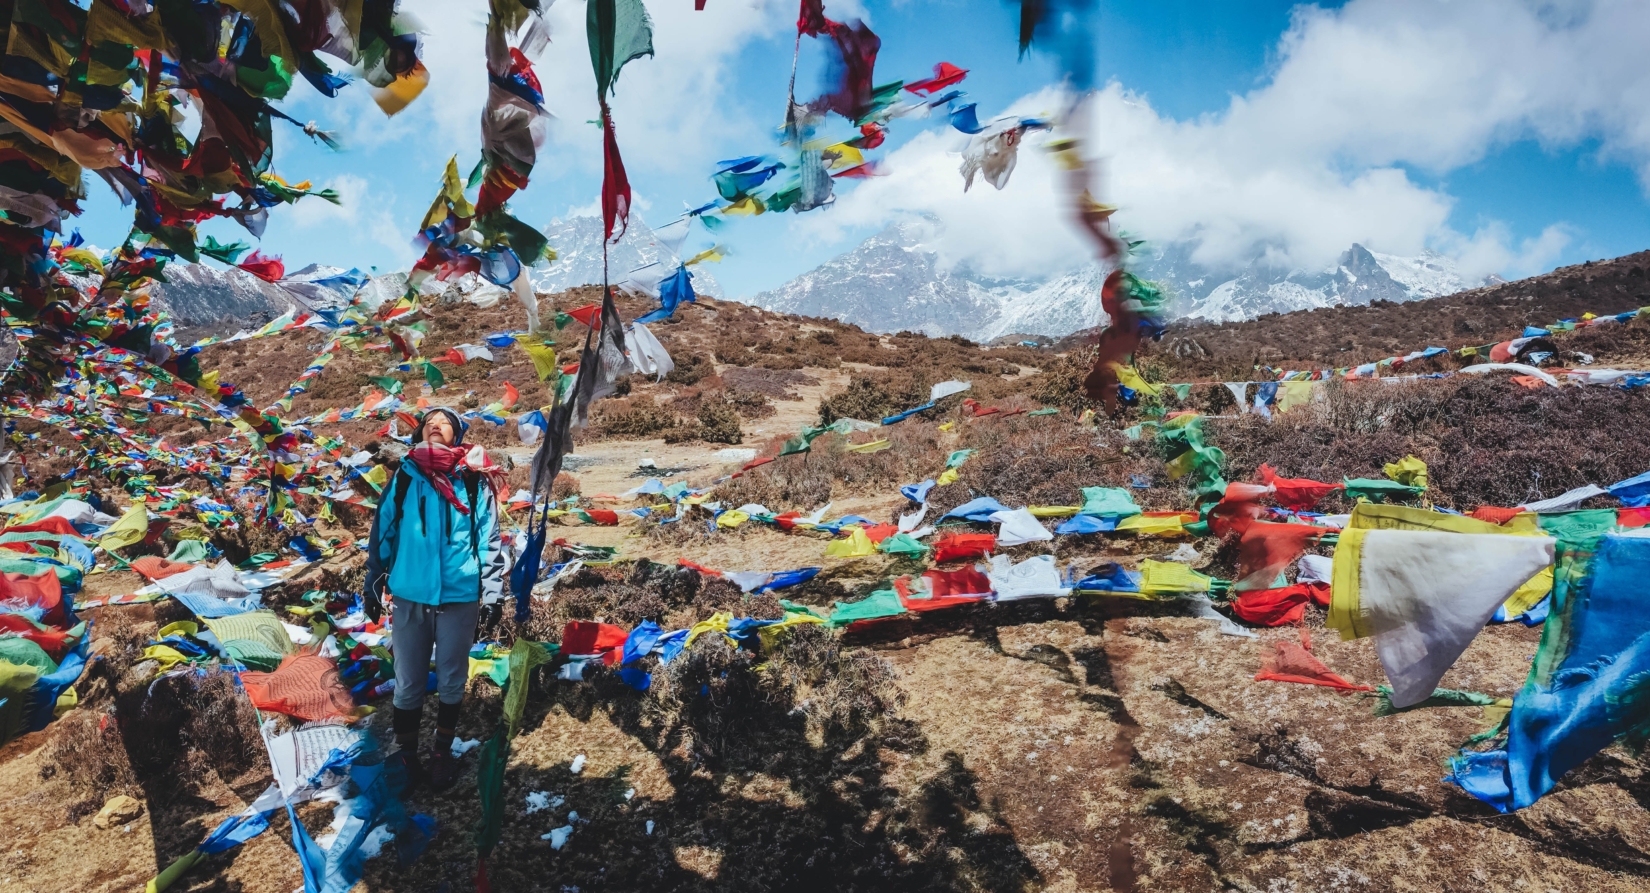 A solo trekker pauses in a sea of prayer flags, blown in the wind, as she treks in the Himalayas